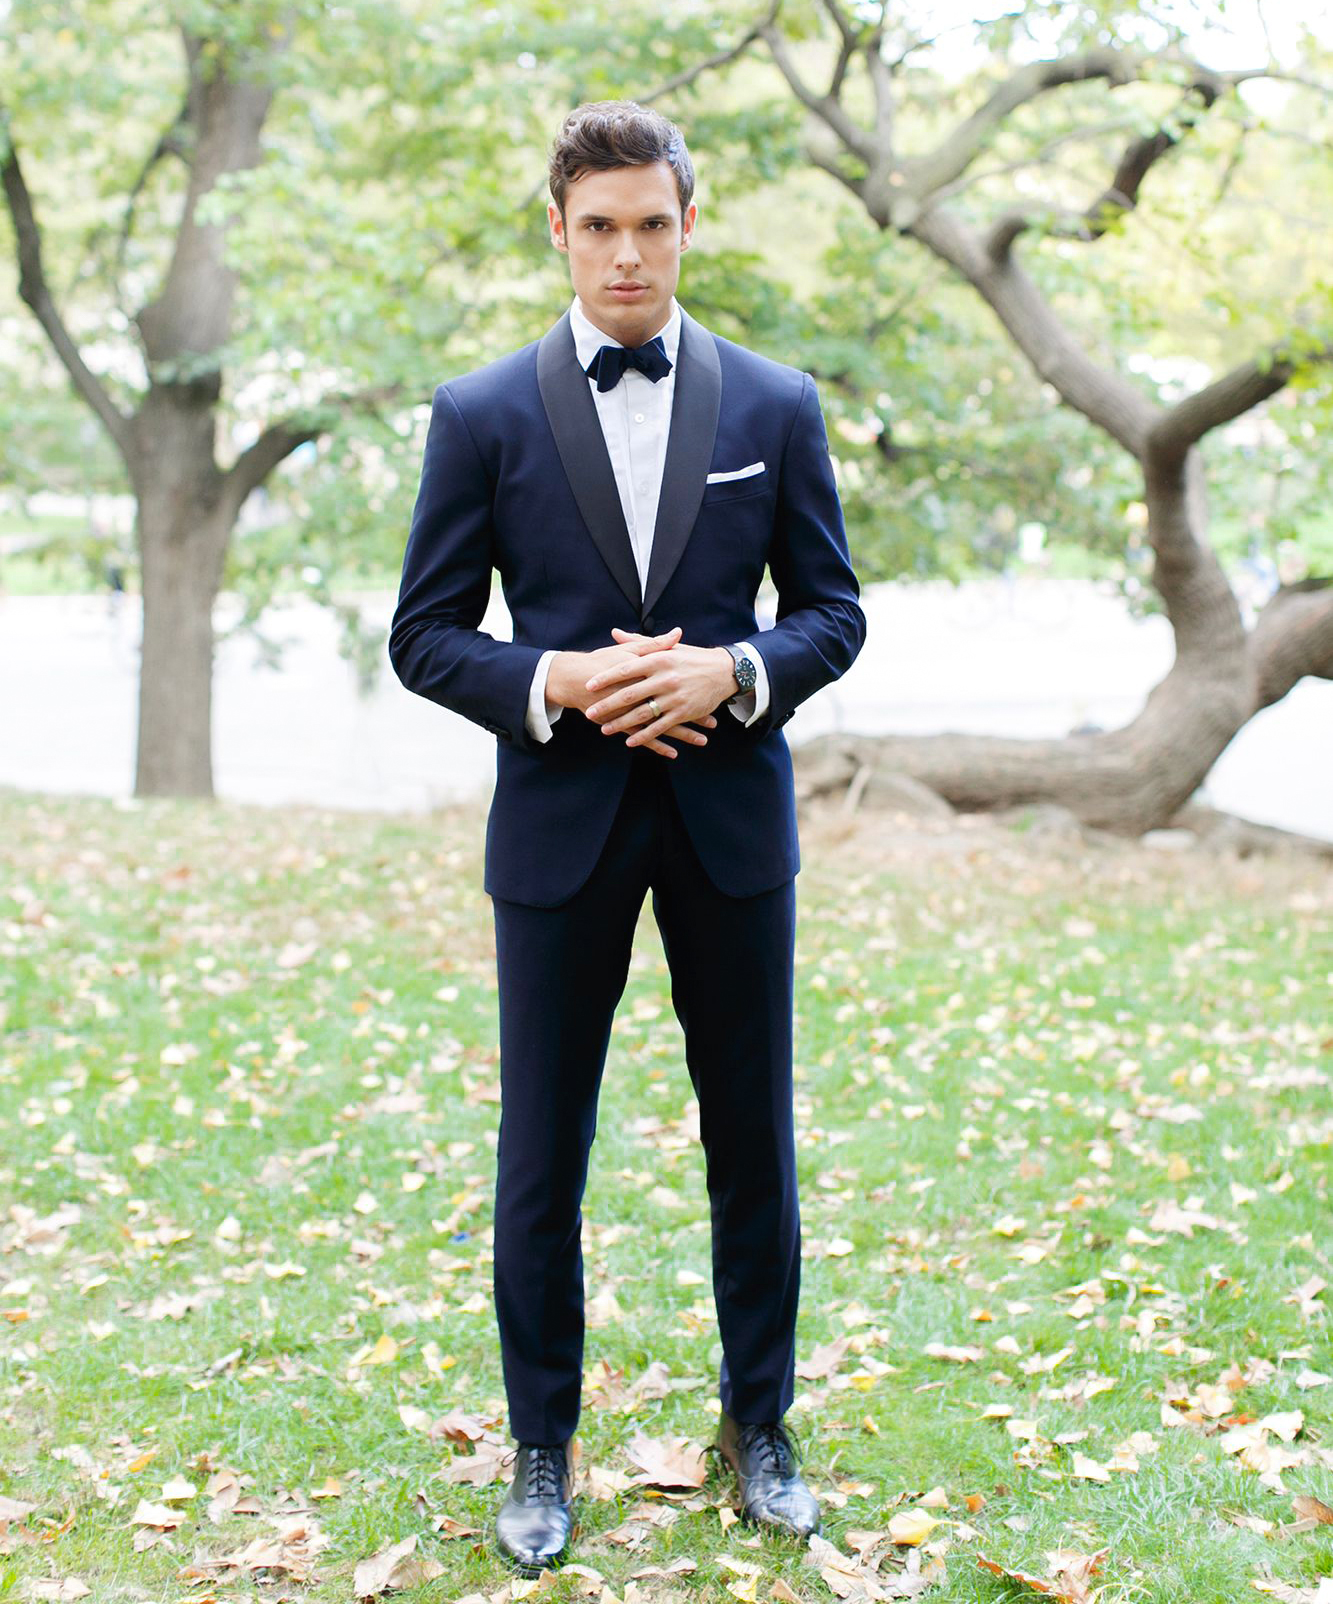 Own your formal wedding suit instead of renting it